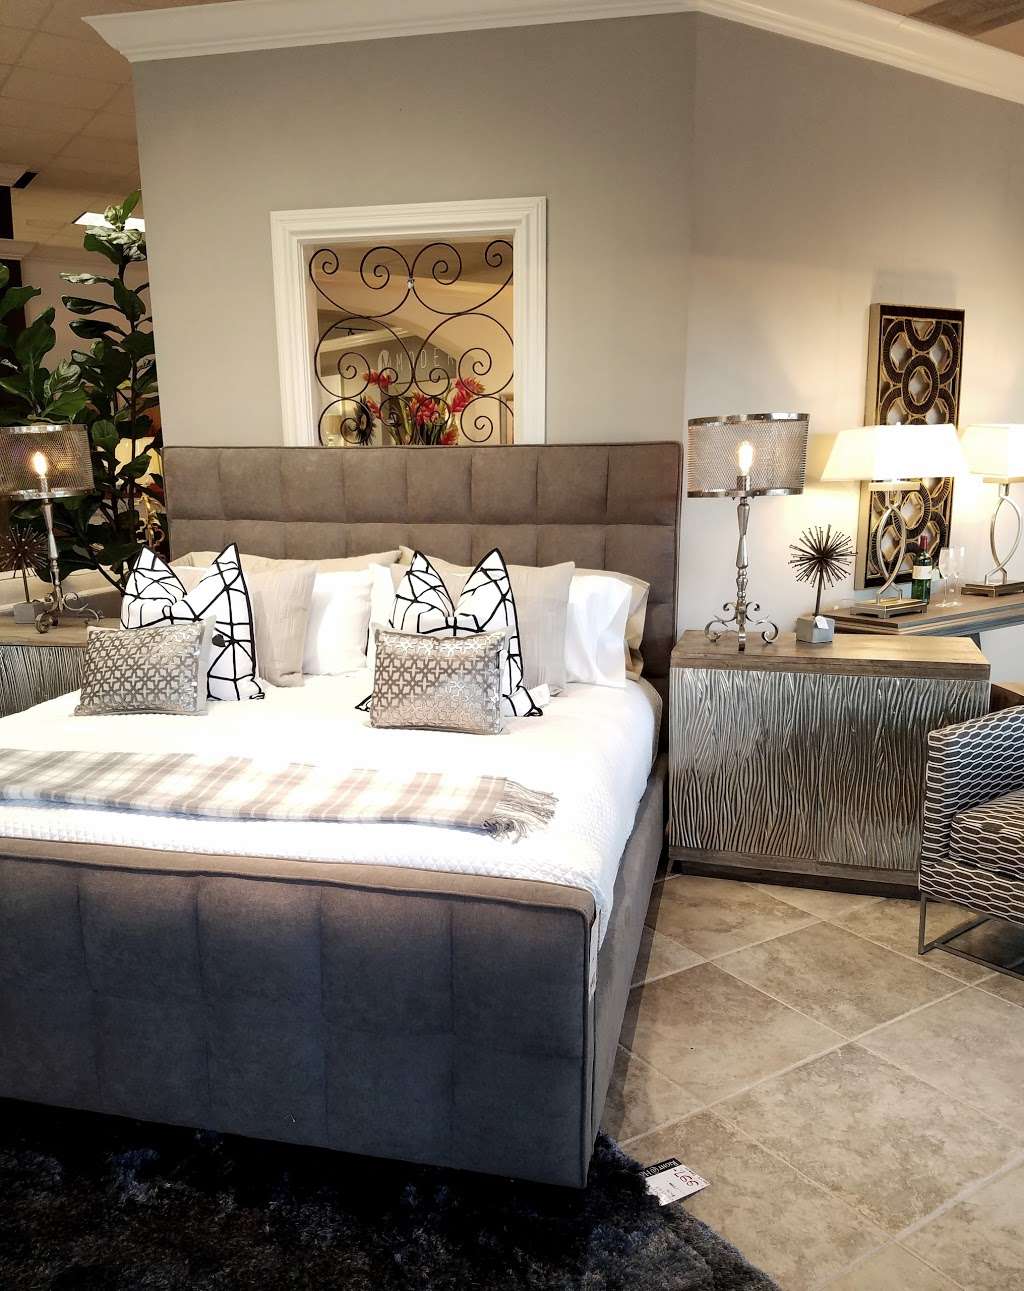 Right At Home Furniture | 520 West State Road 436 #1150, Altamonte Springs, FL 32714 | Phone: (407) 339-4663